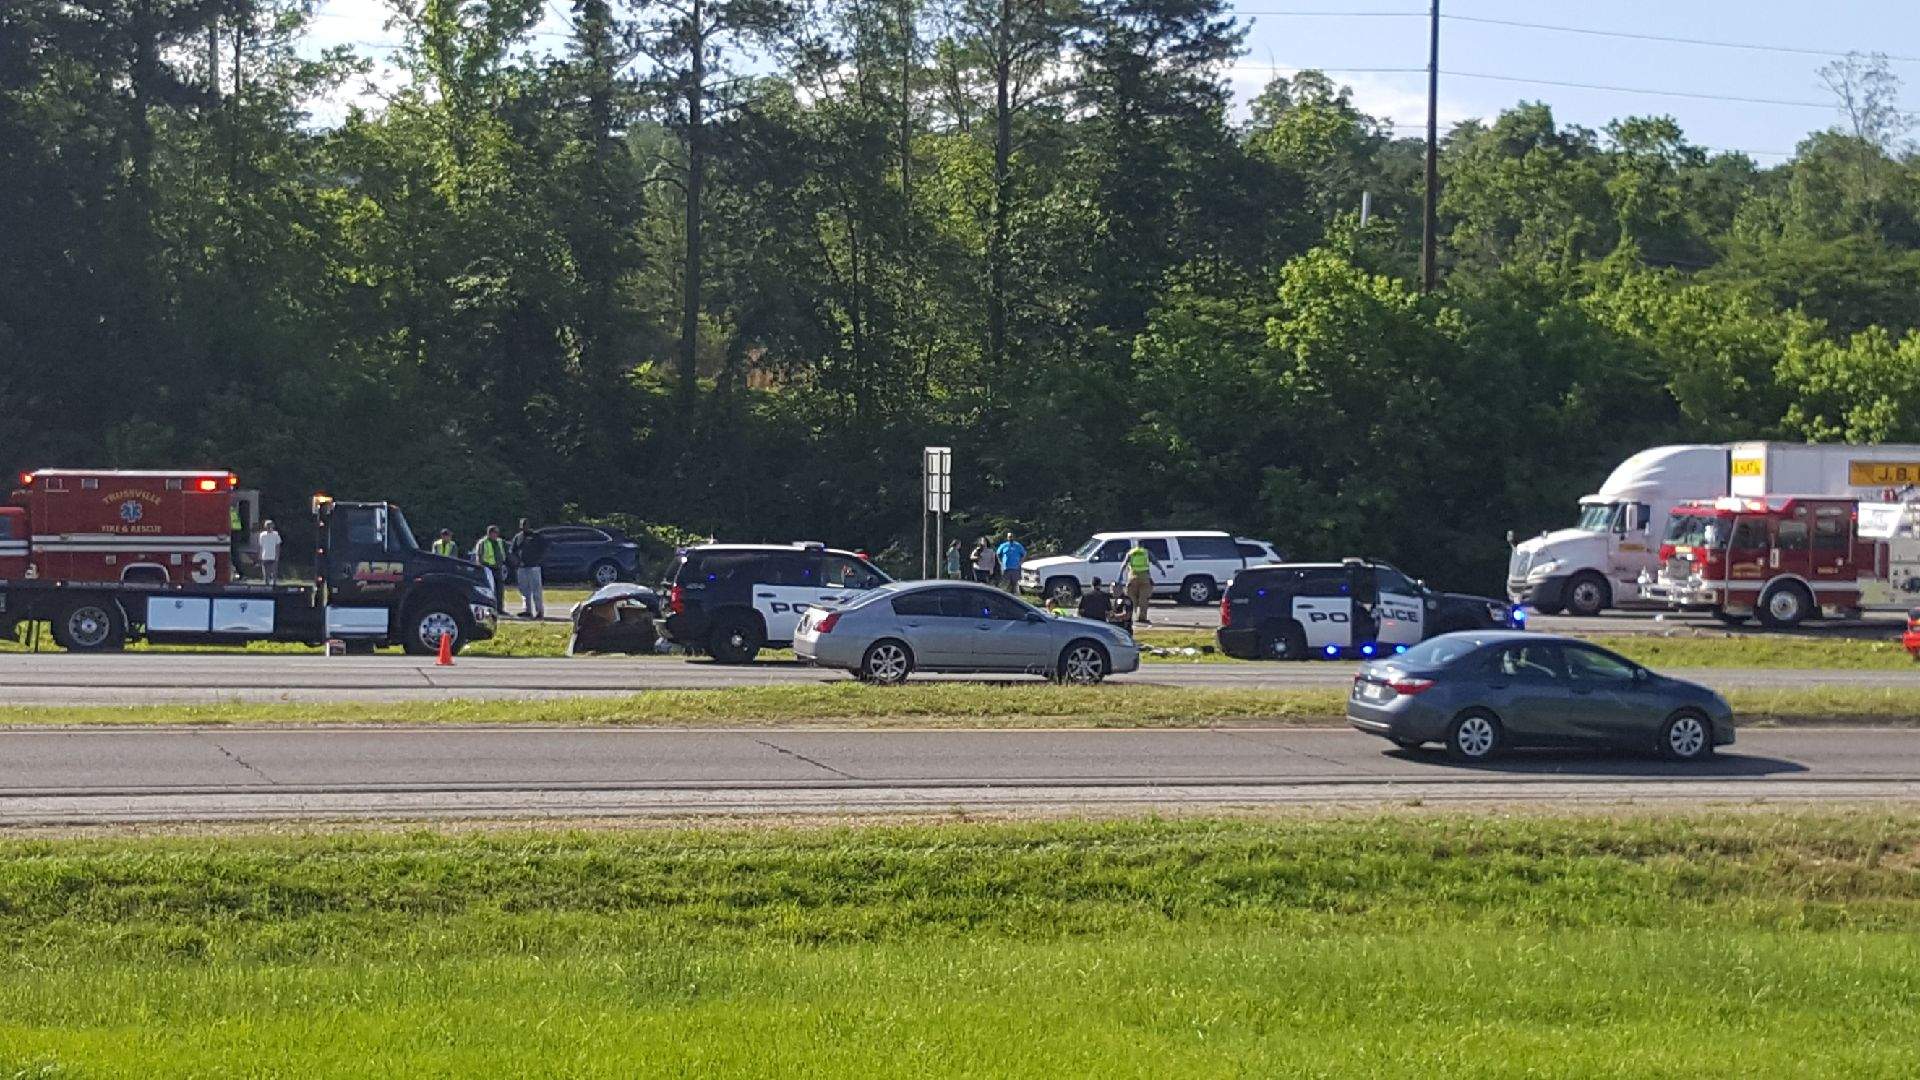 Truck rolls over, two injured in I-59 crash in Trussville on Sunday